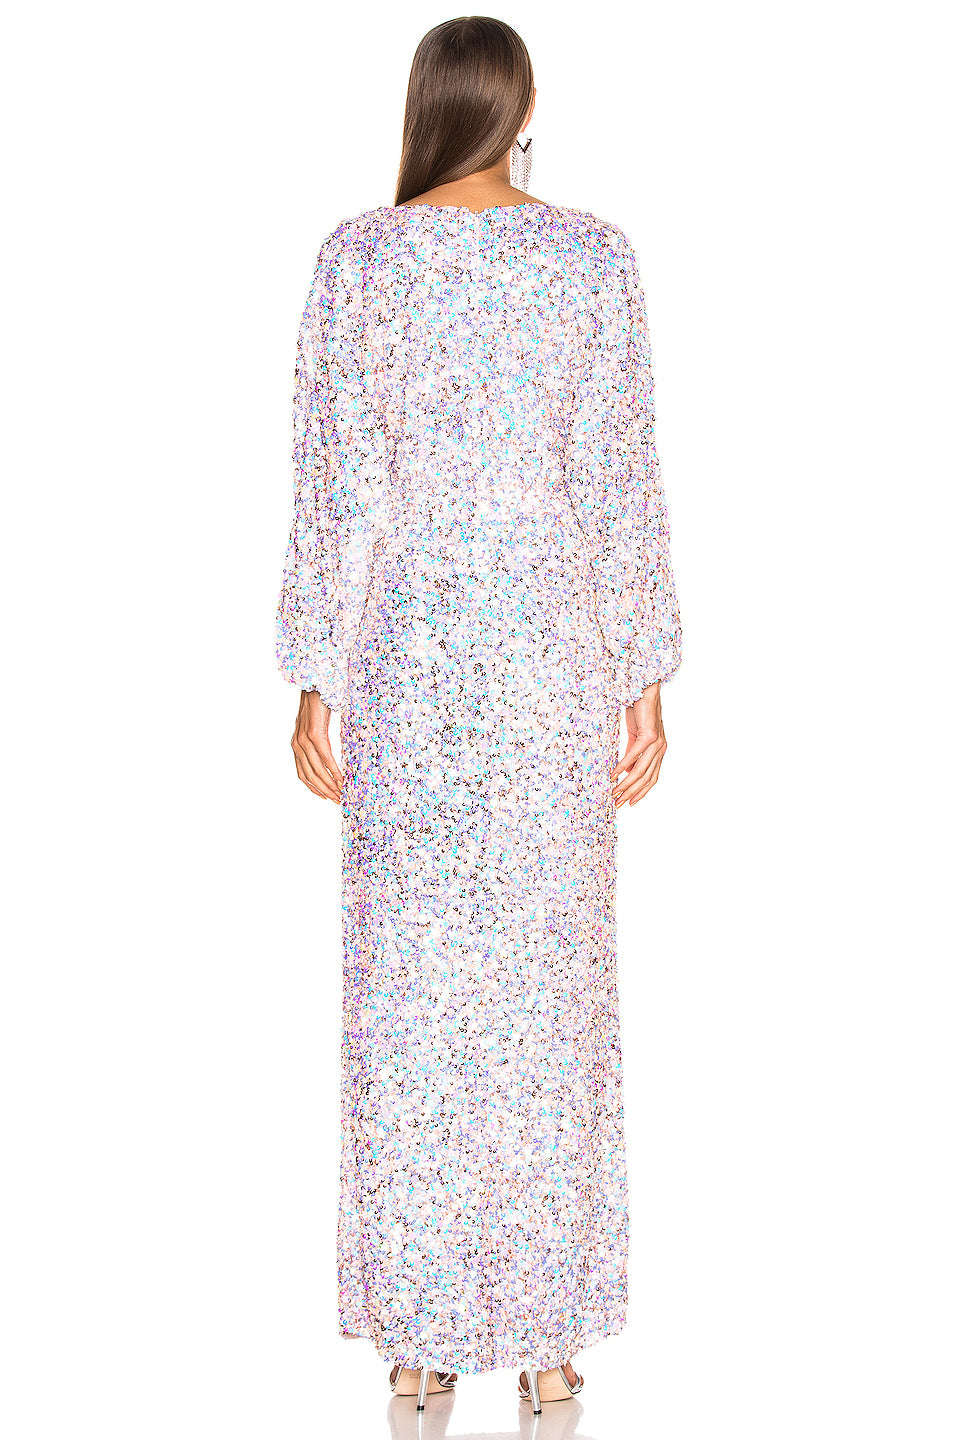 Retrofete RETROFETE Camille Gown ( Pink Galaxy) - RRP [title],299 - retrofete-camille-gown-pink-galaxy---rrp-299-dress-for-a-night-30756704.jpg